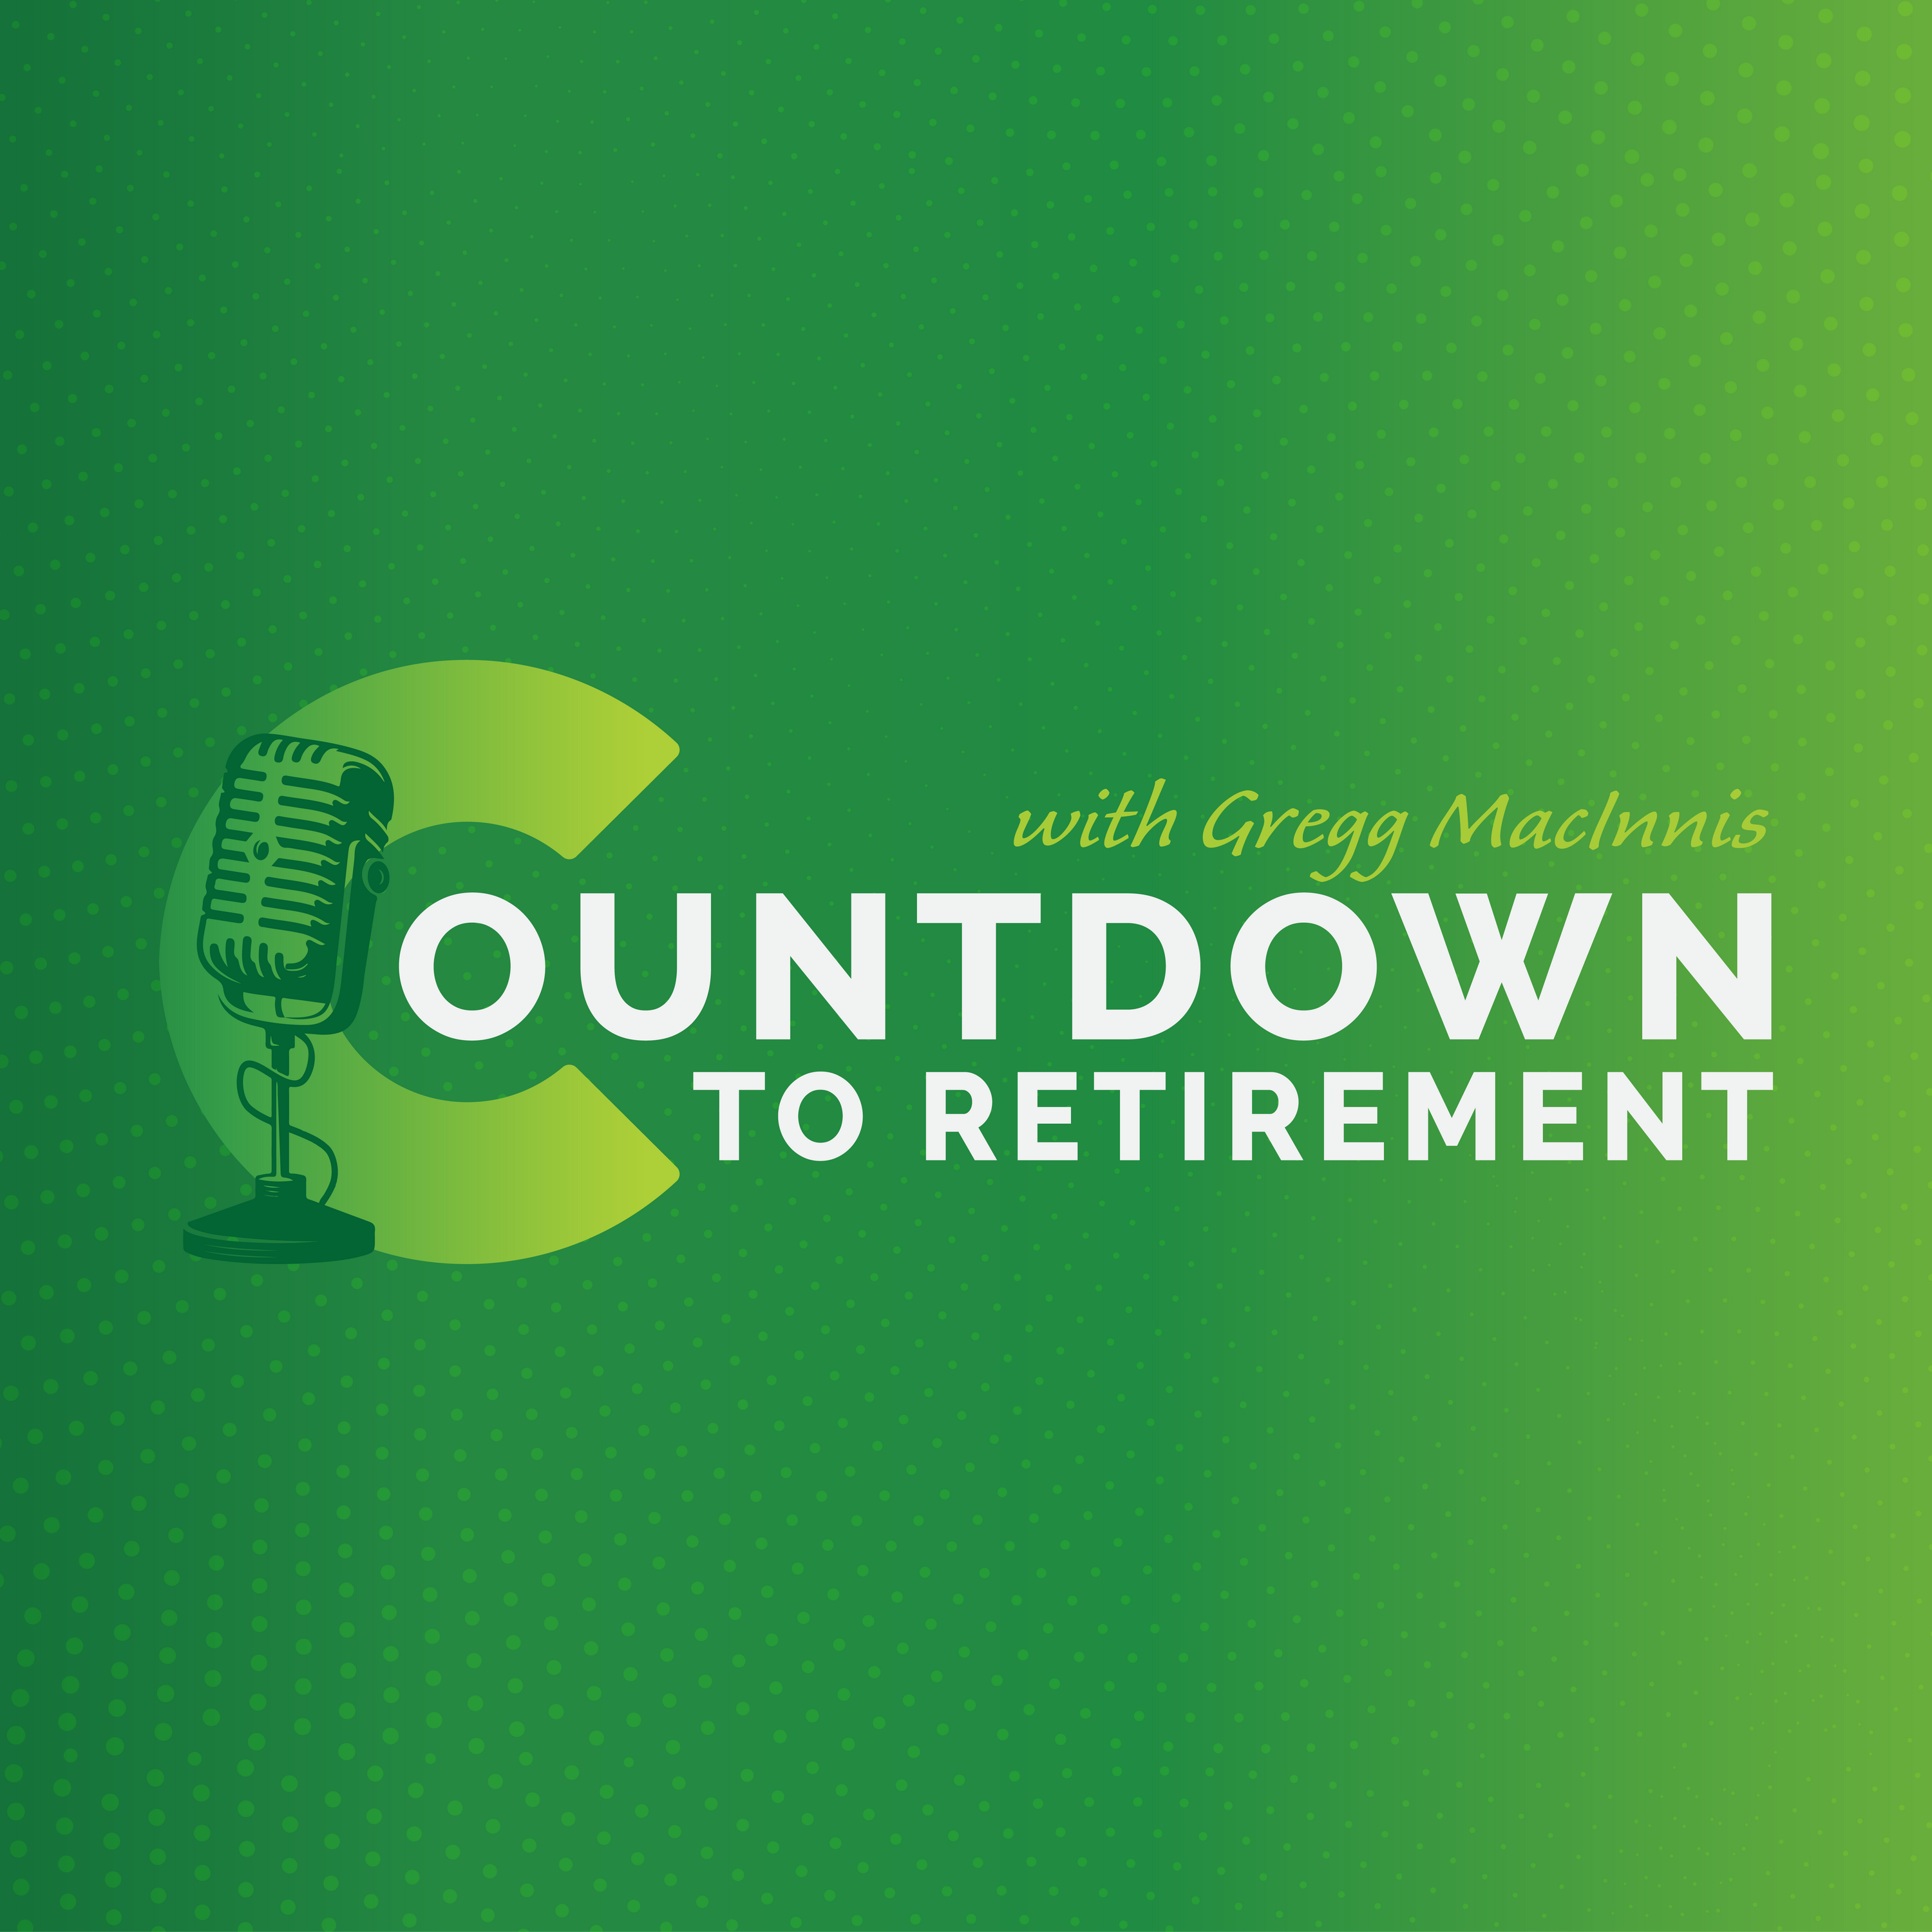 Are you planning for a fulfilling retirement?